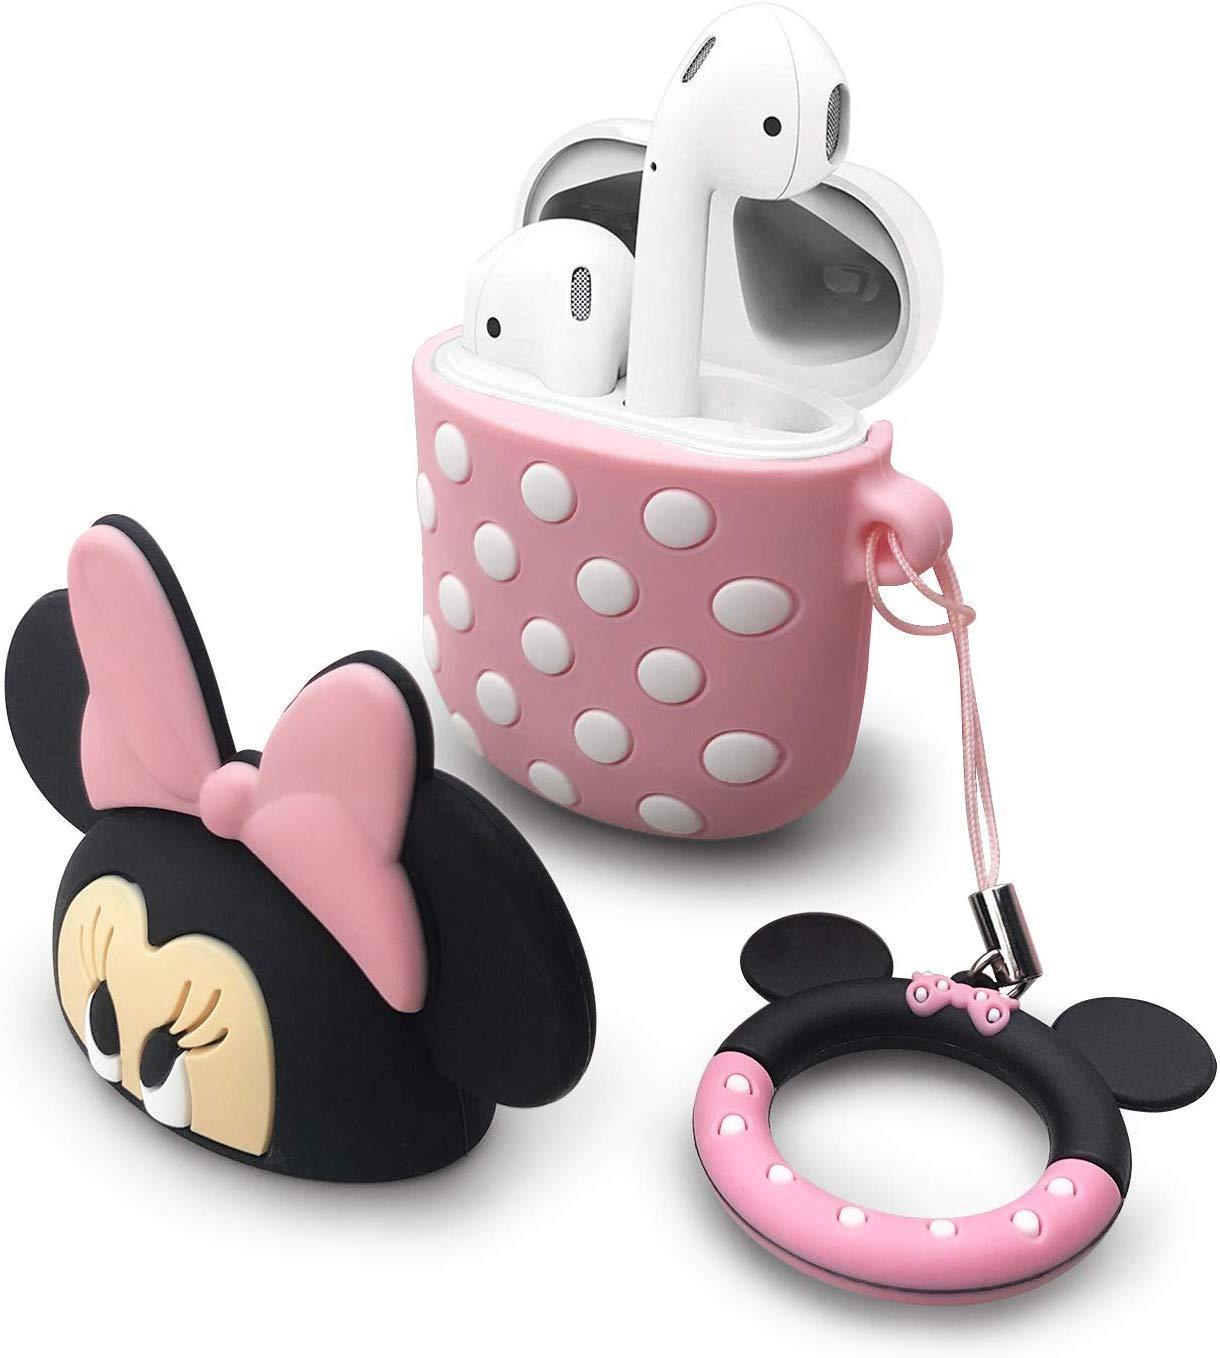 Minnie Mouse Apple Airpods Case - Lottemi